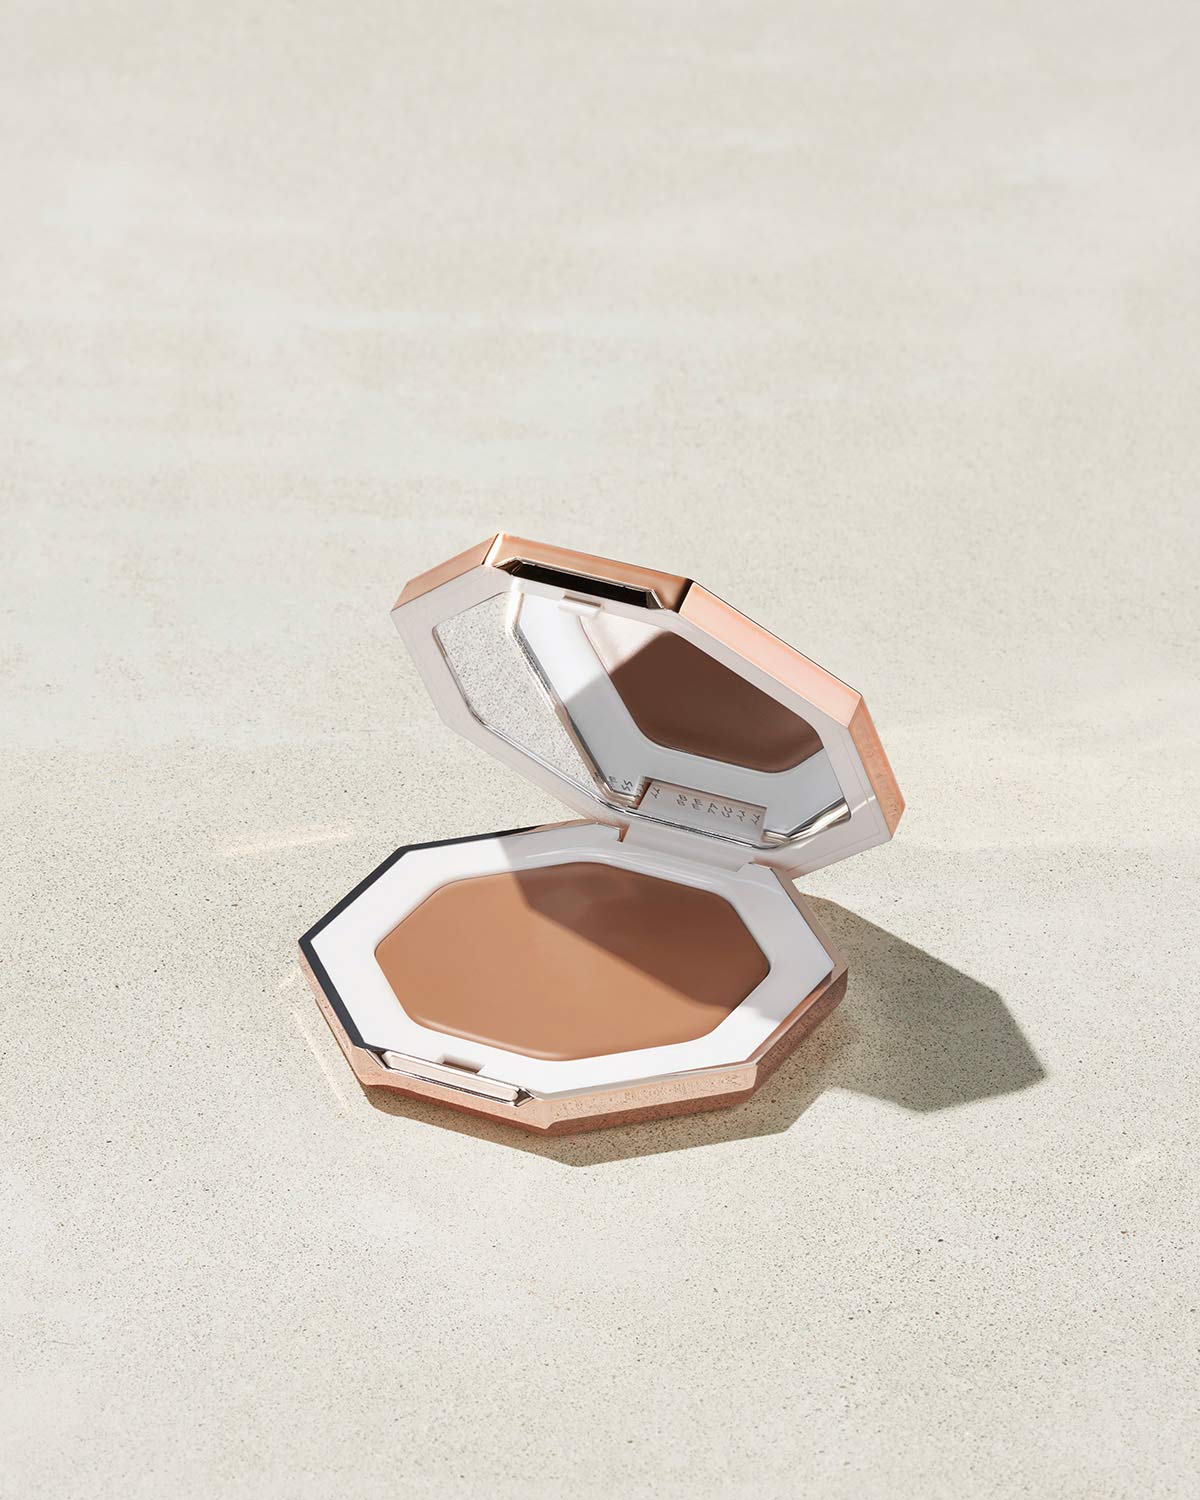 7. Fenty Beauty Cheeks Out Freestyle Cream Bronzer